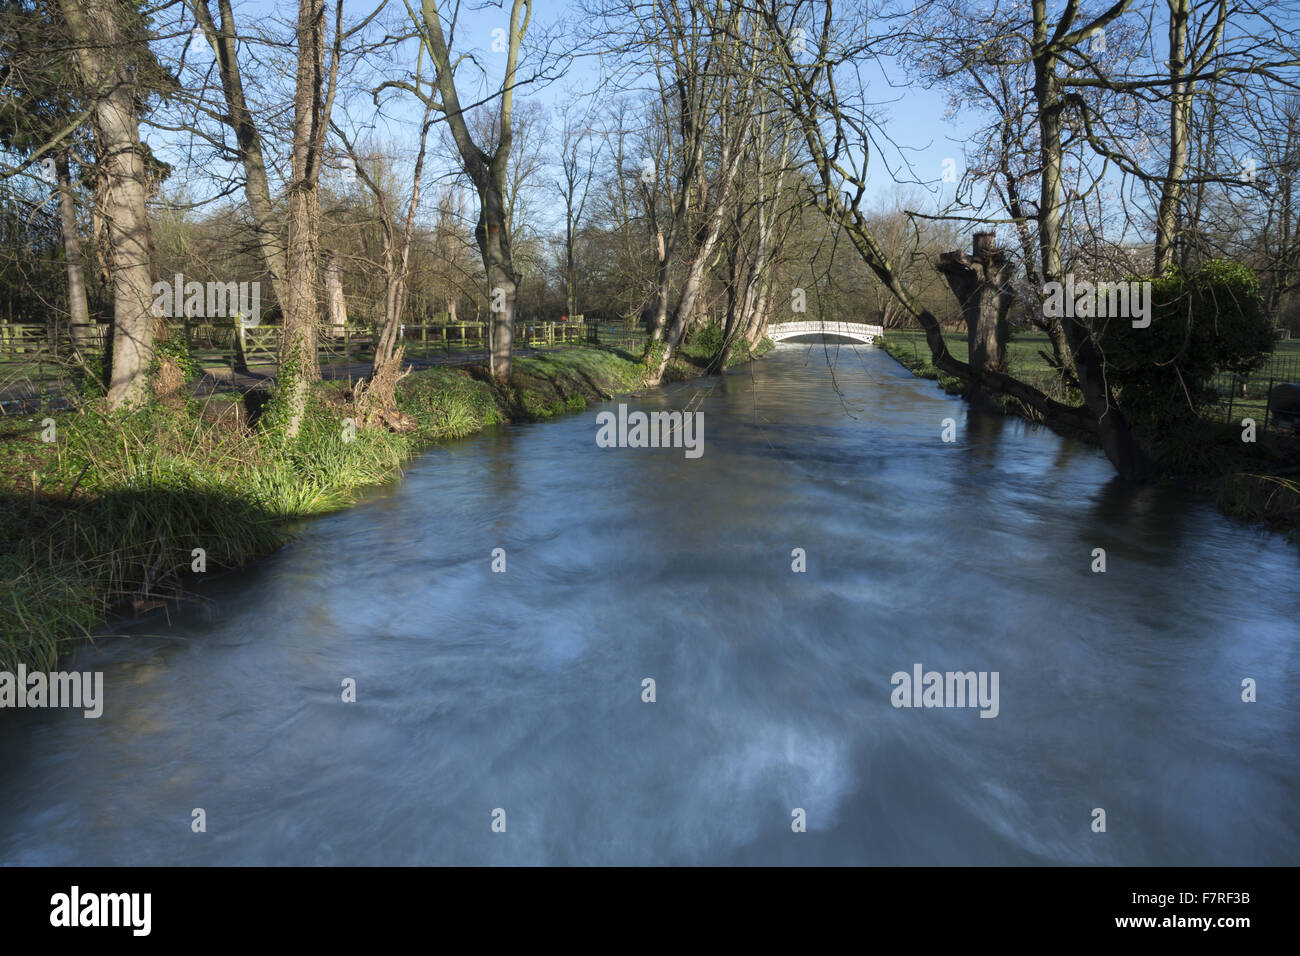 The River Wandle at Morden Hall Park, London, in the winter. Morden Hall Park is a serene oasis in the heart of suburban London. Stock Photo